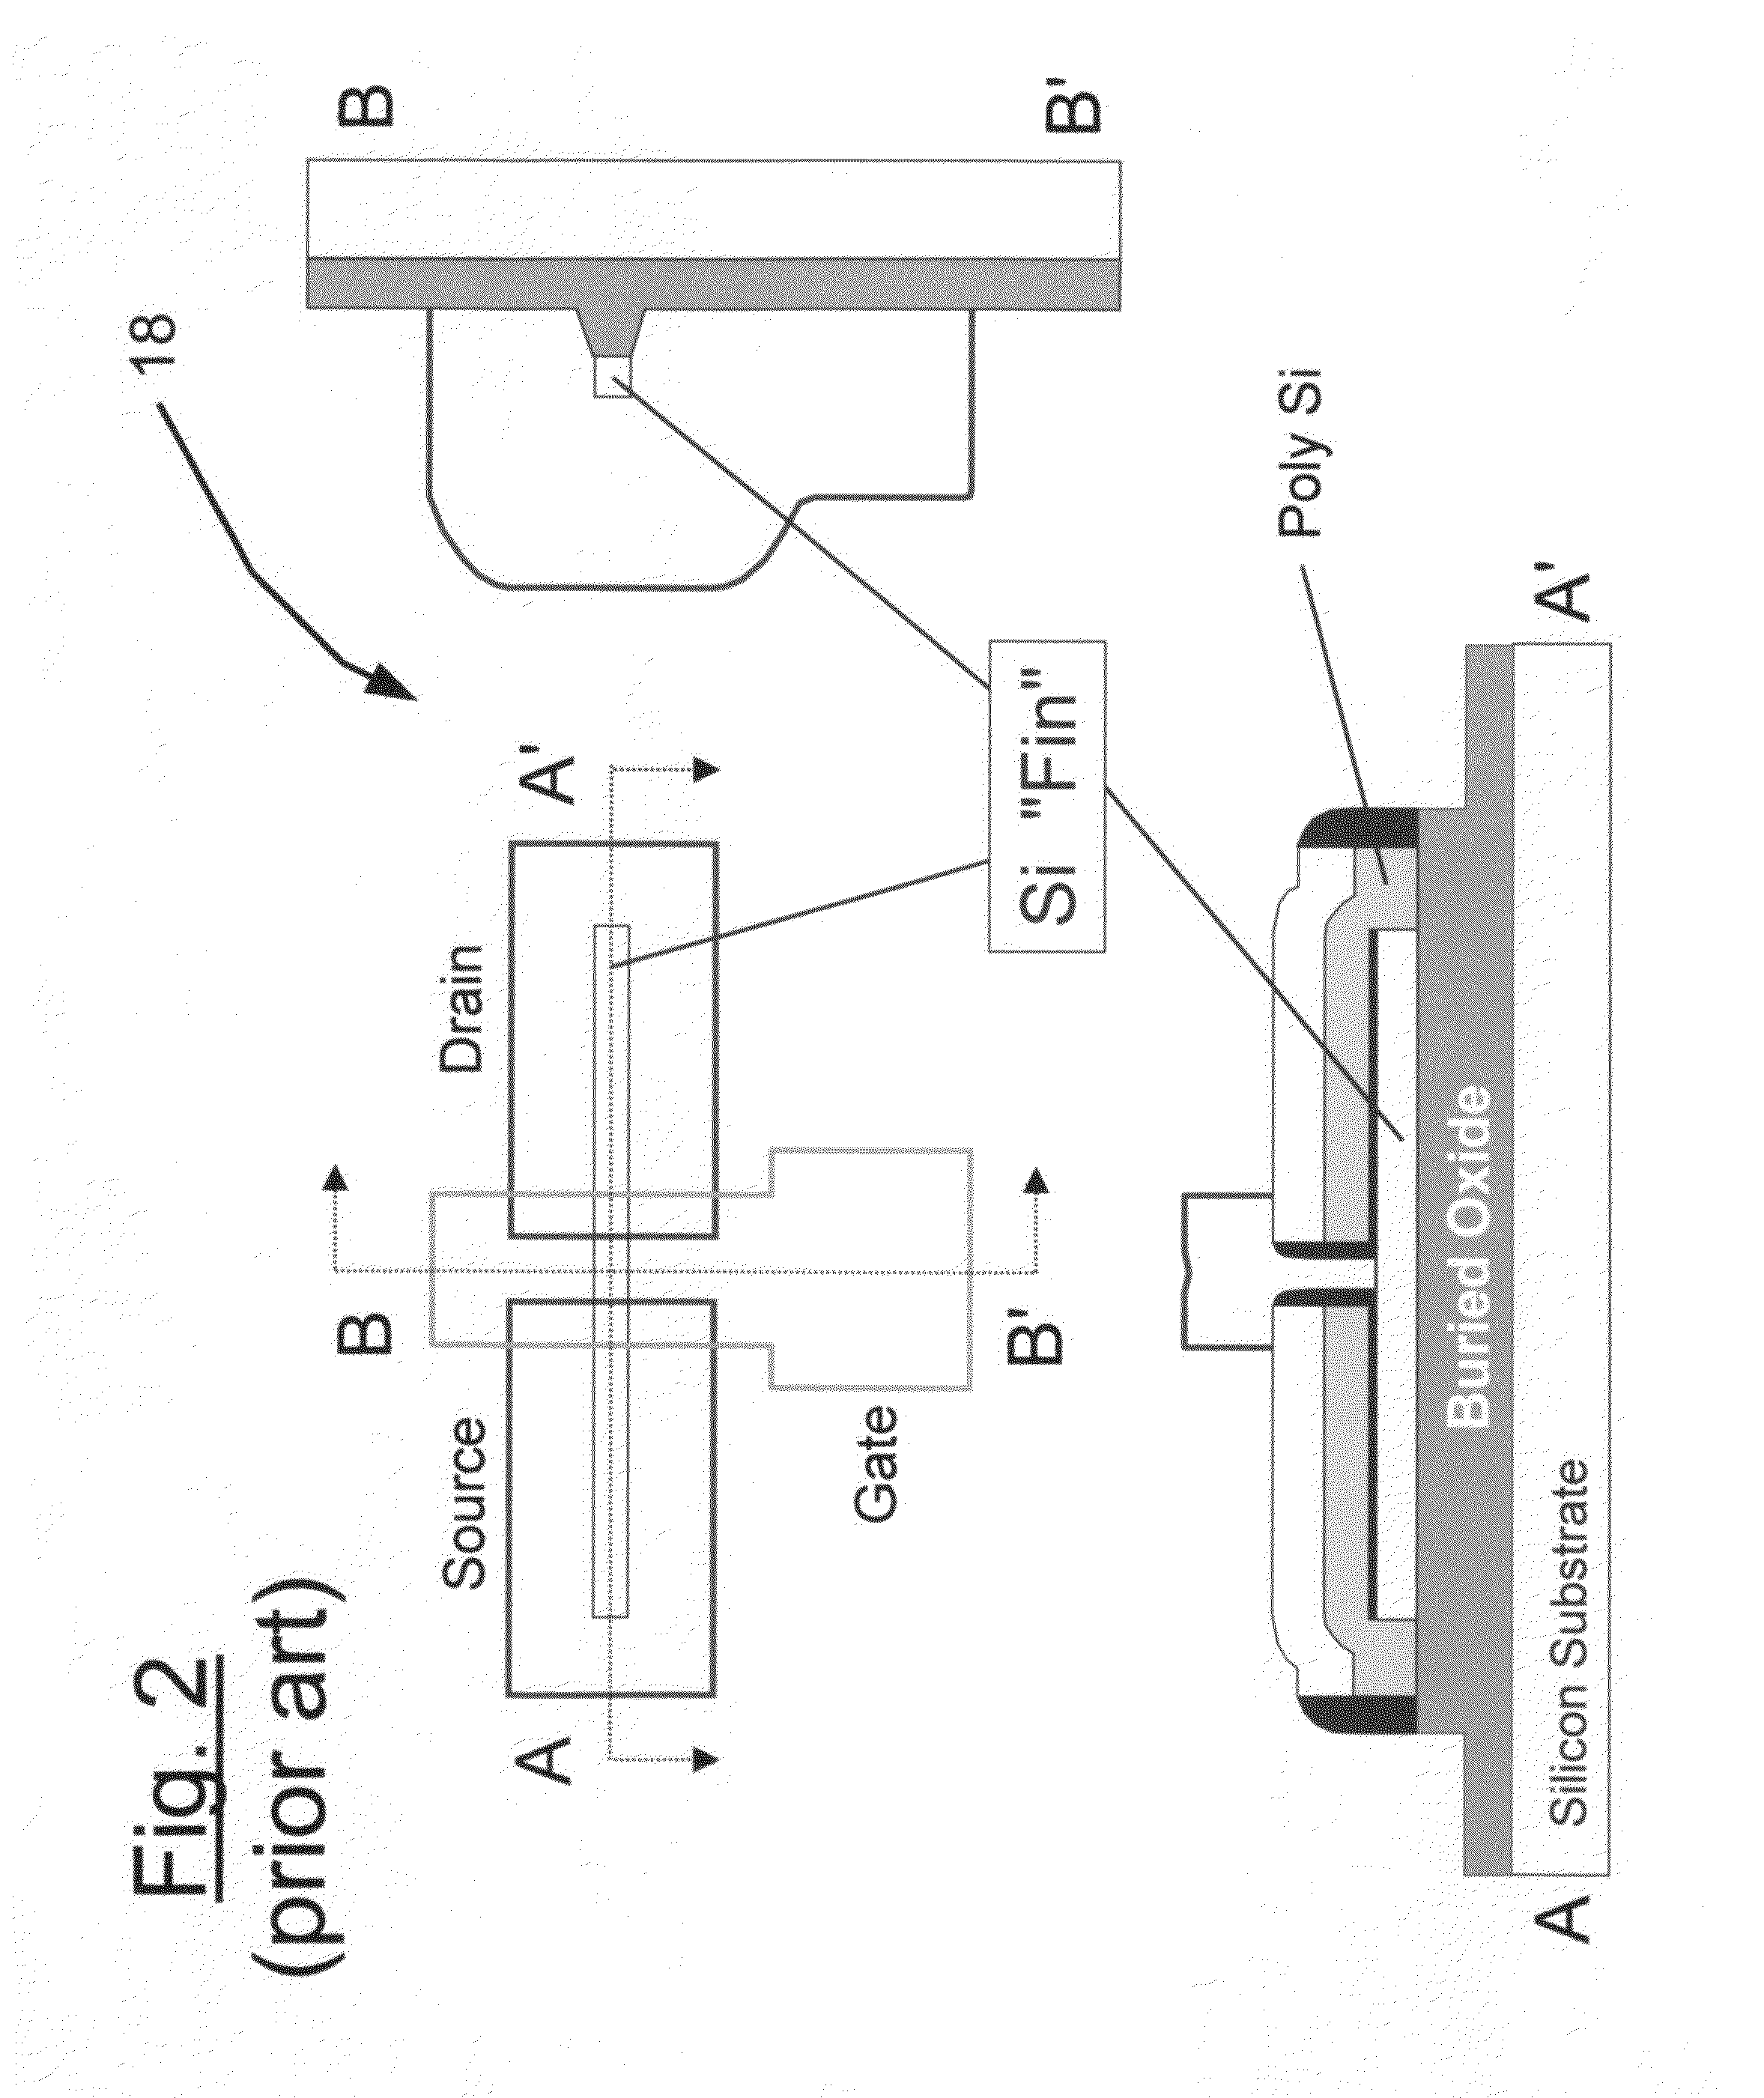 Castellated gate MOSFET device capable of fully-depleted operation